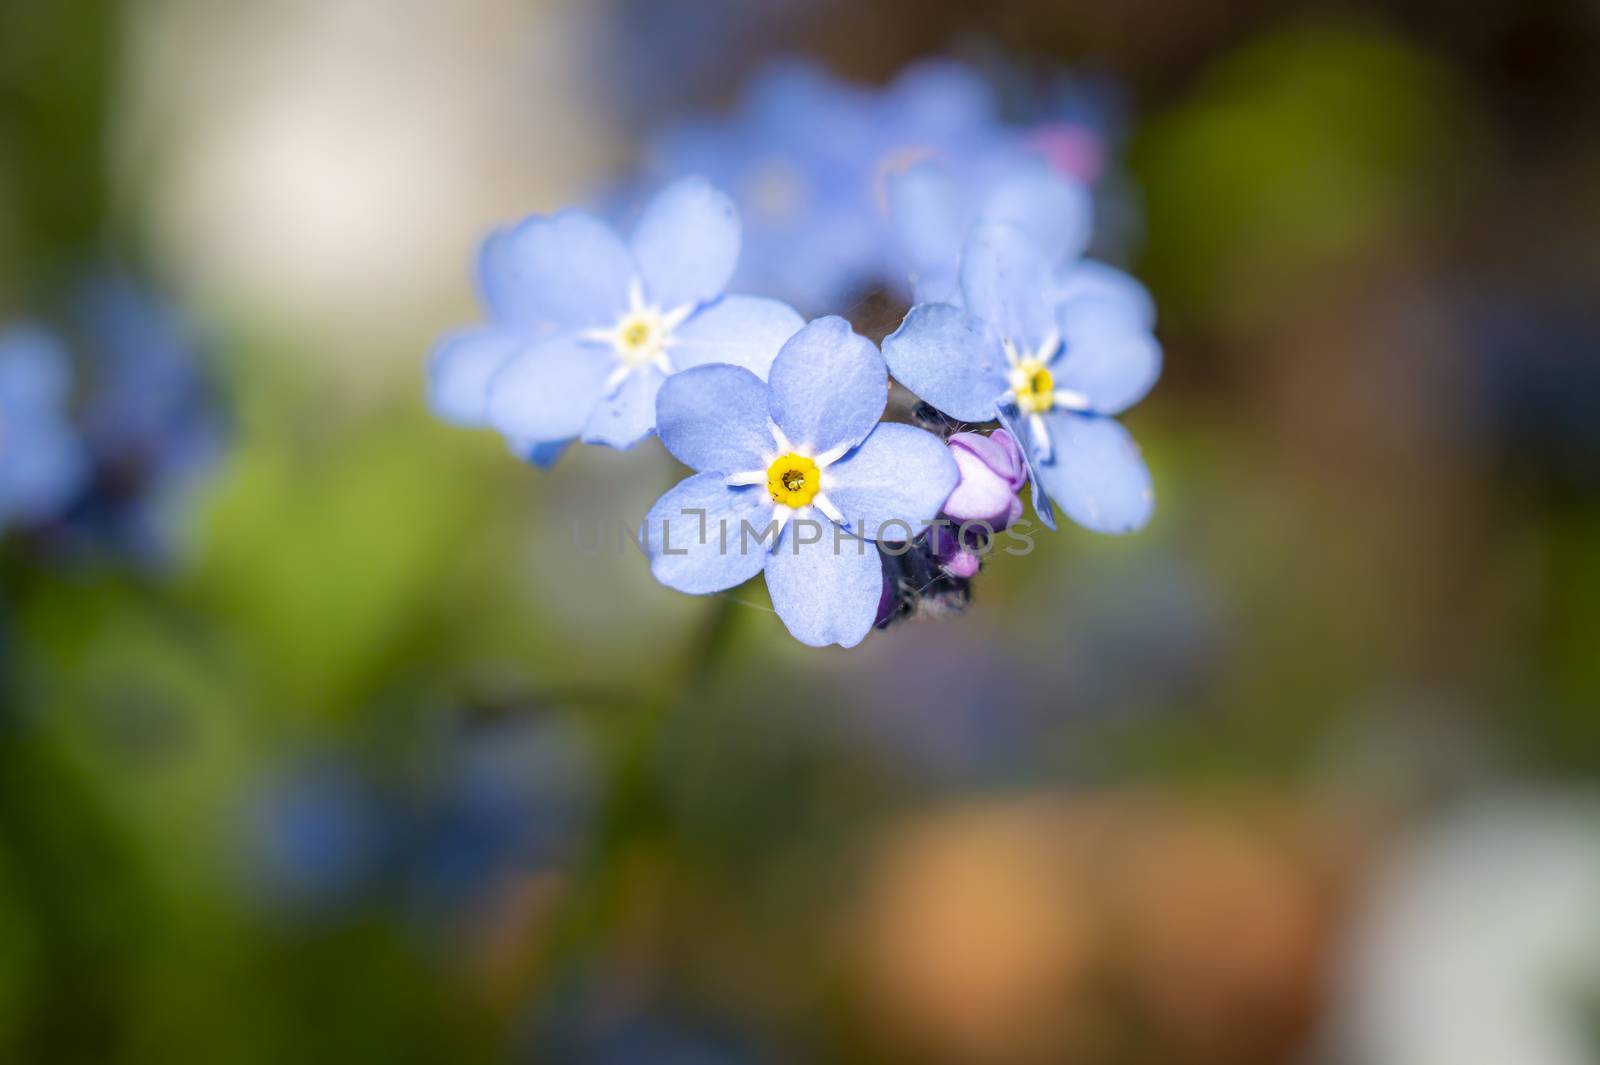 Myosotis sylvatica, the wood forget-me-not or woodland forget-me-not flowers